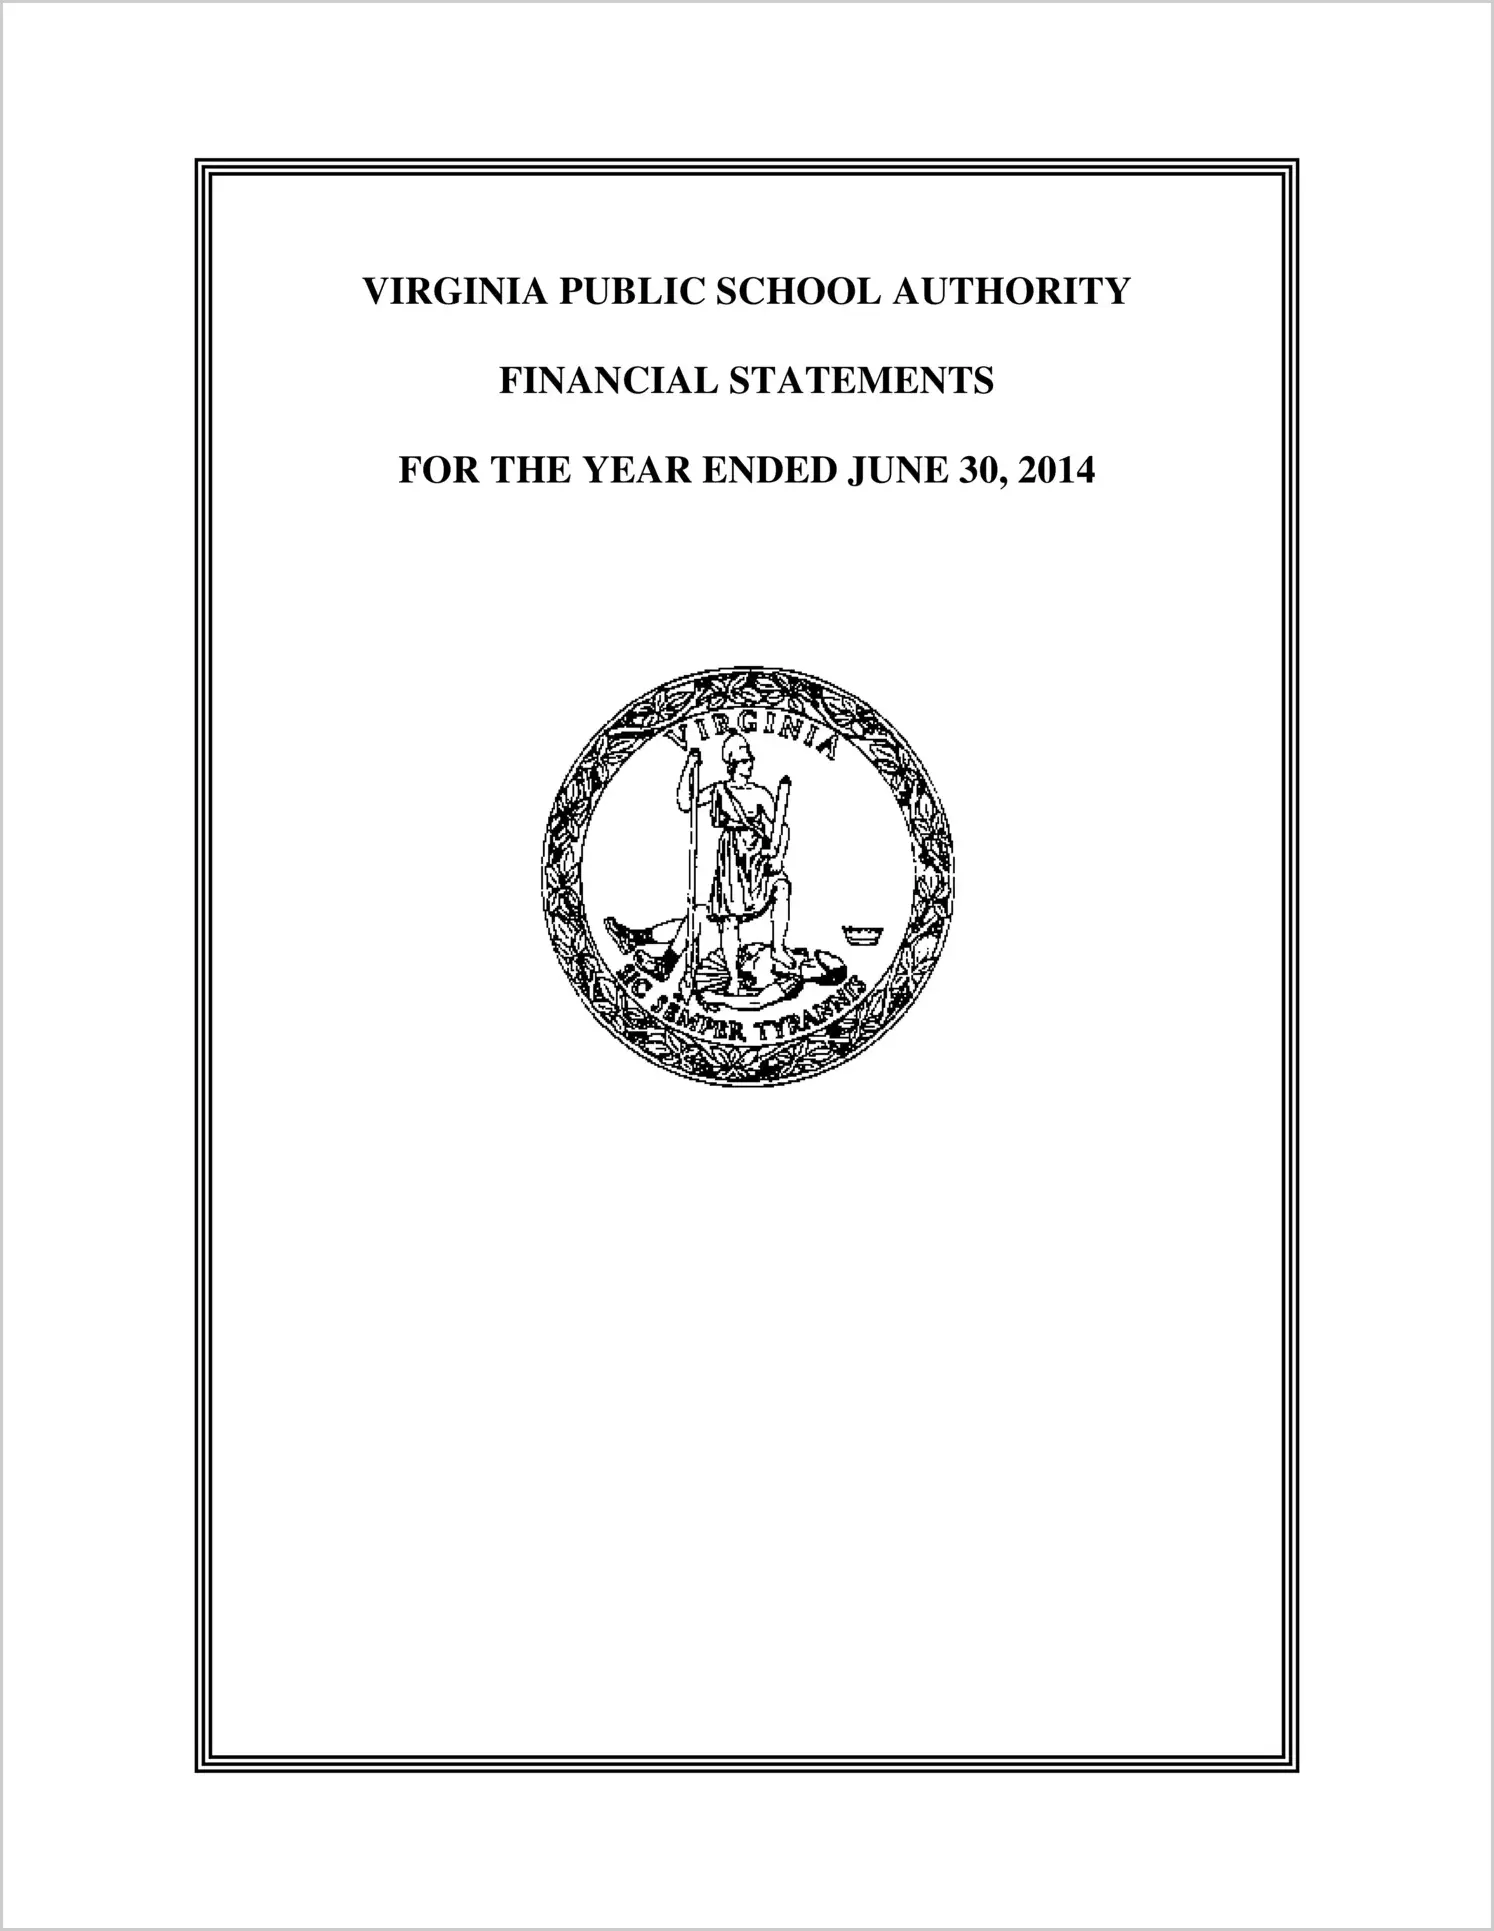 Virginia Public School Authority Financial Statements for the year ended June 30, 2014